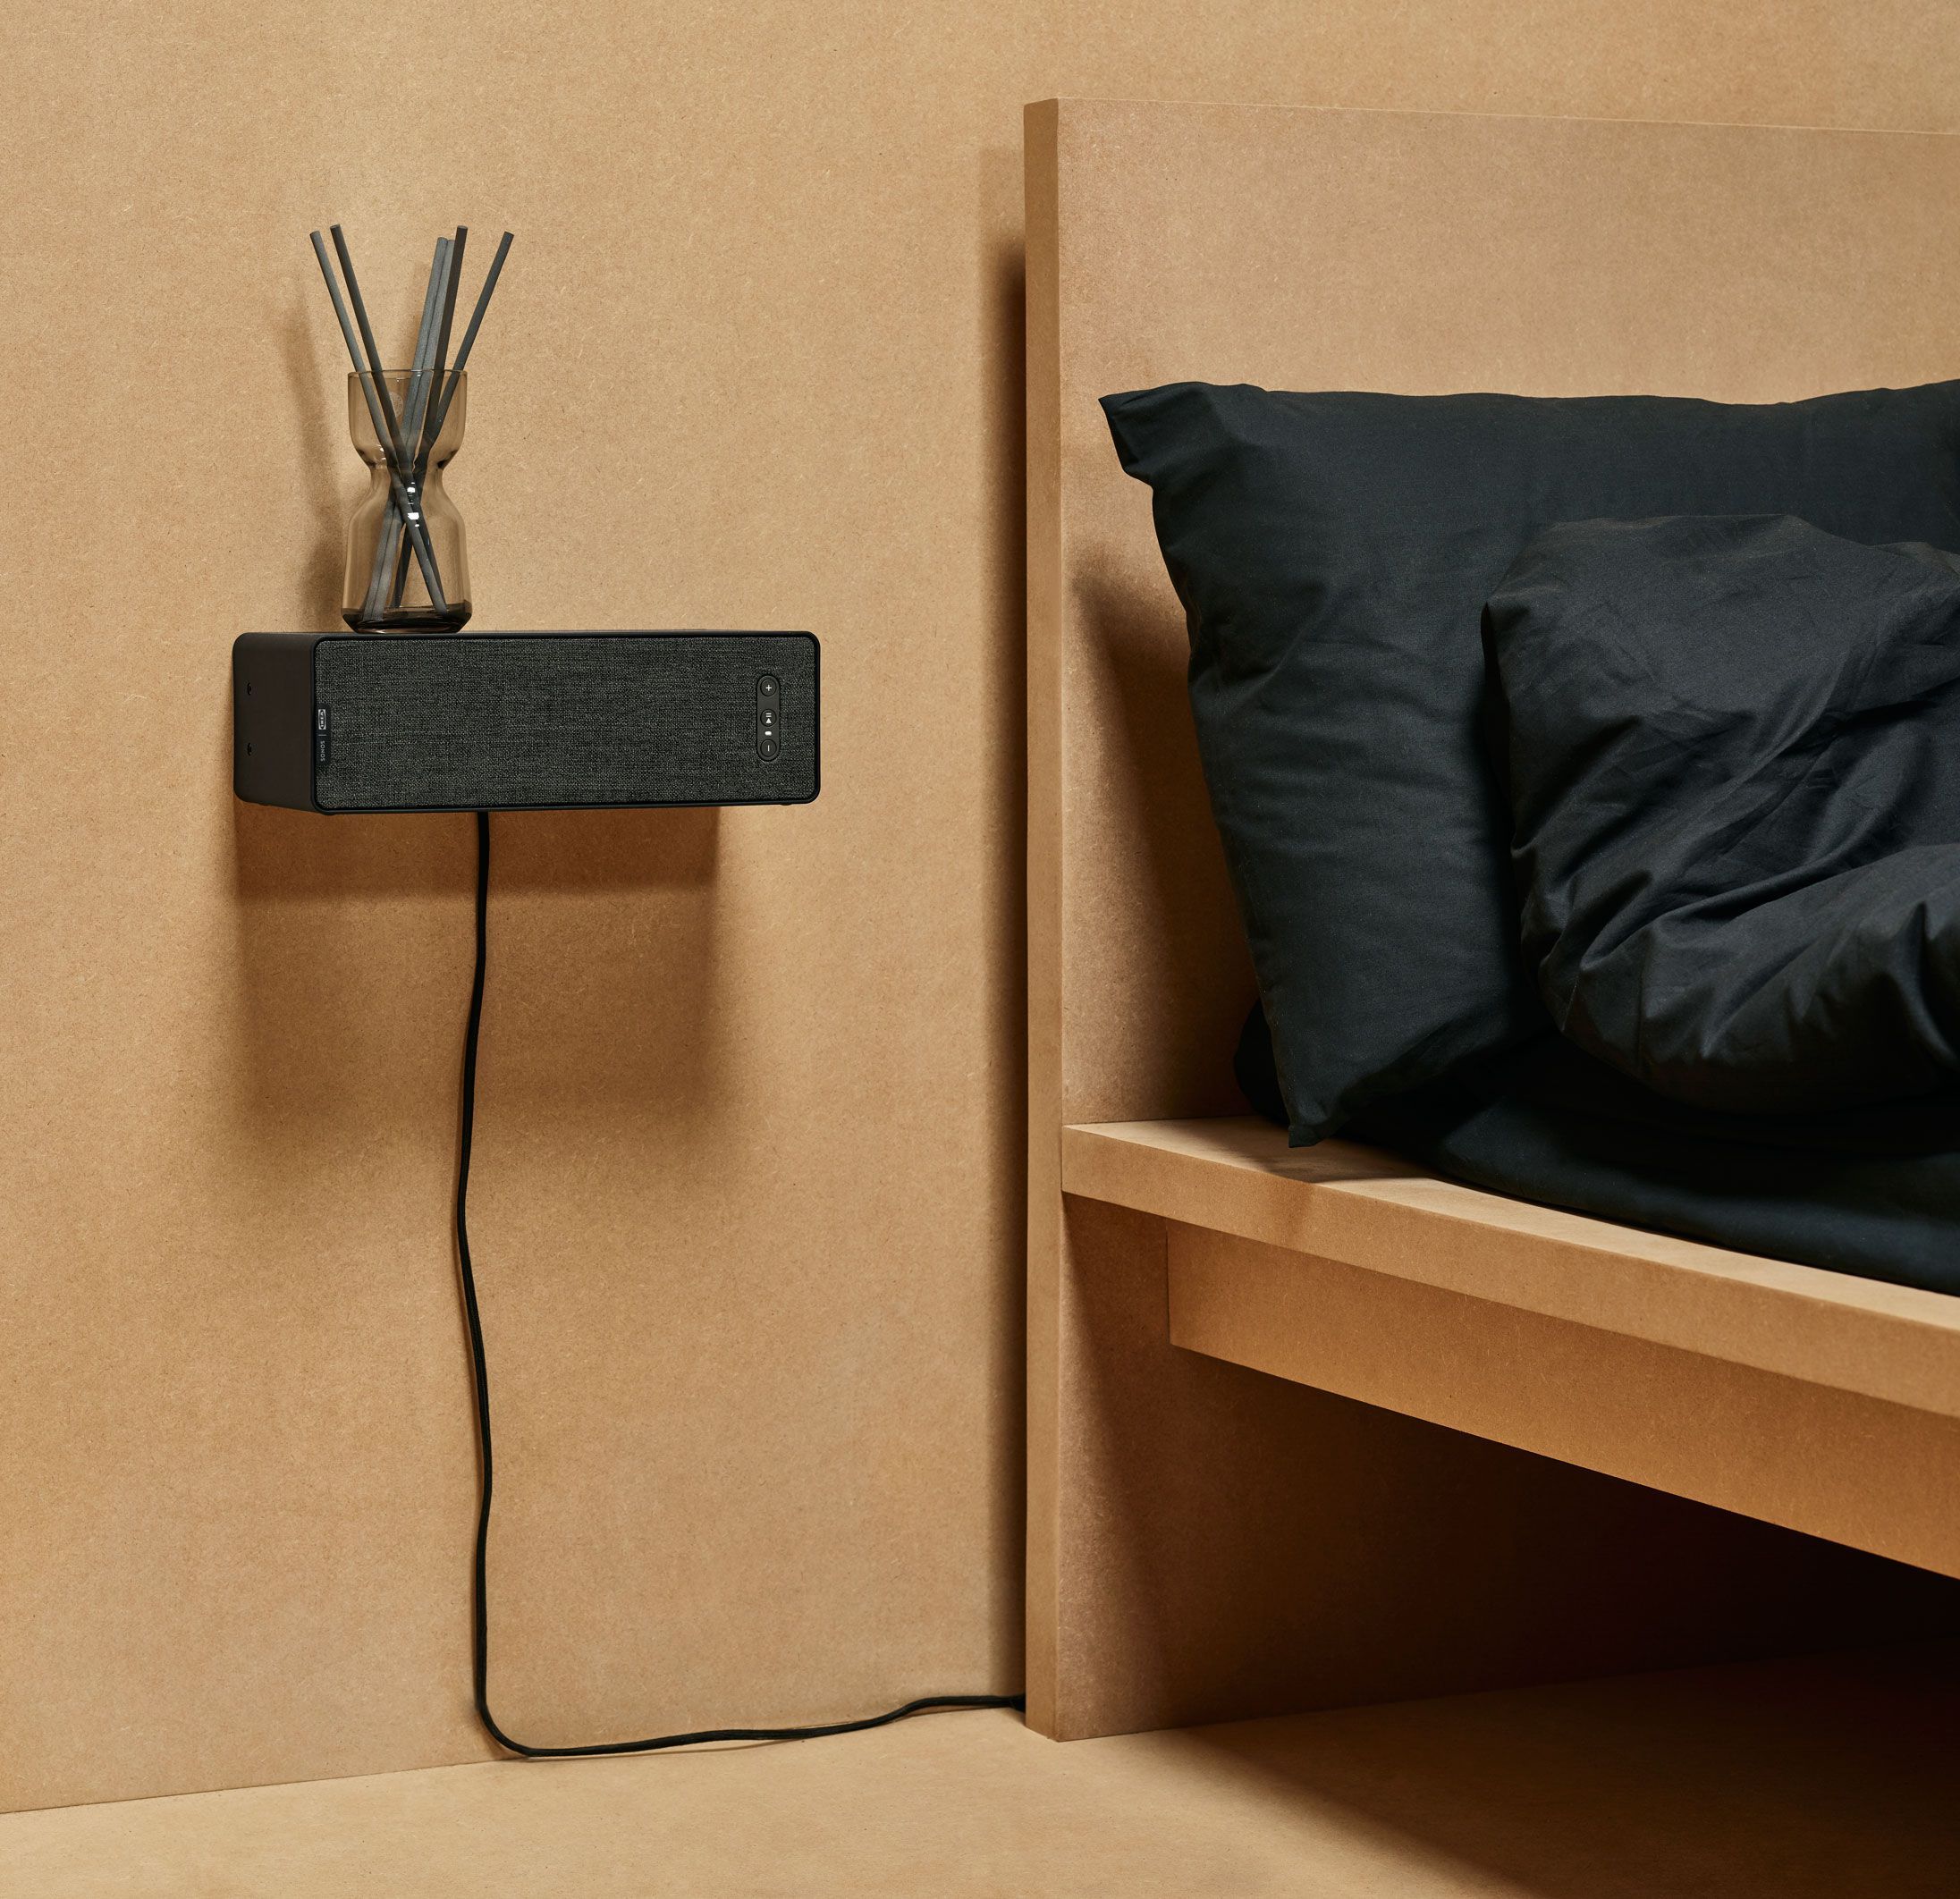 Ikea To Sell Sonos Enabled Lamp And Bookshelf